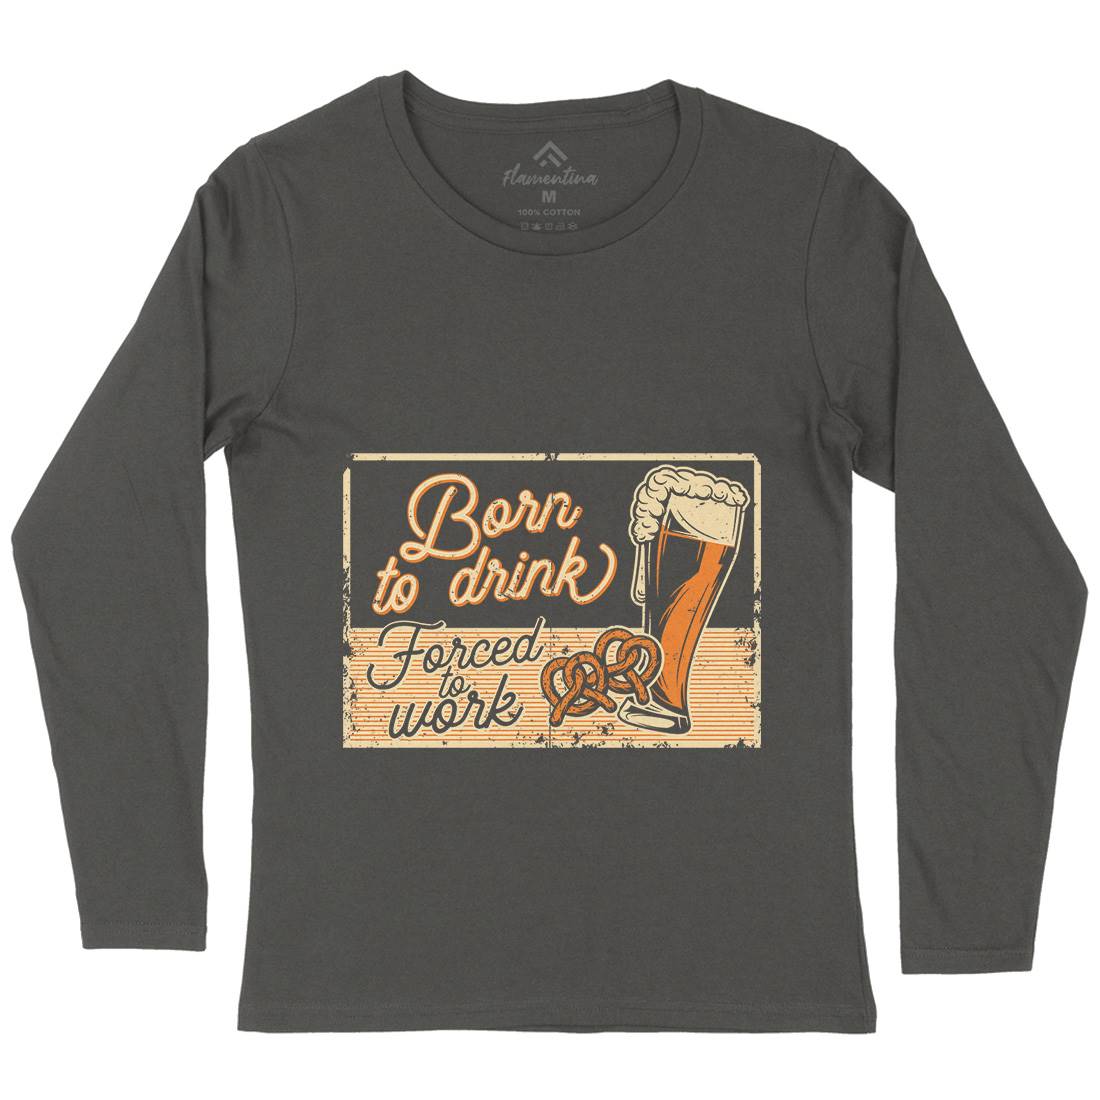 Born To Drink Beer Womens Long Sleeve T-Shirt Drinks B282